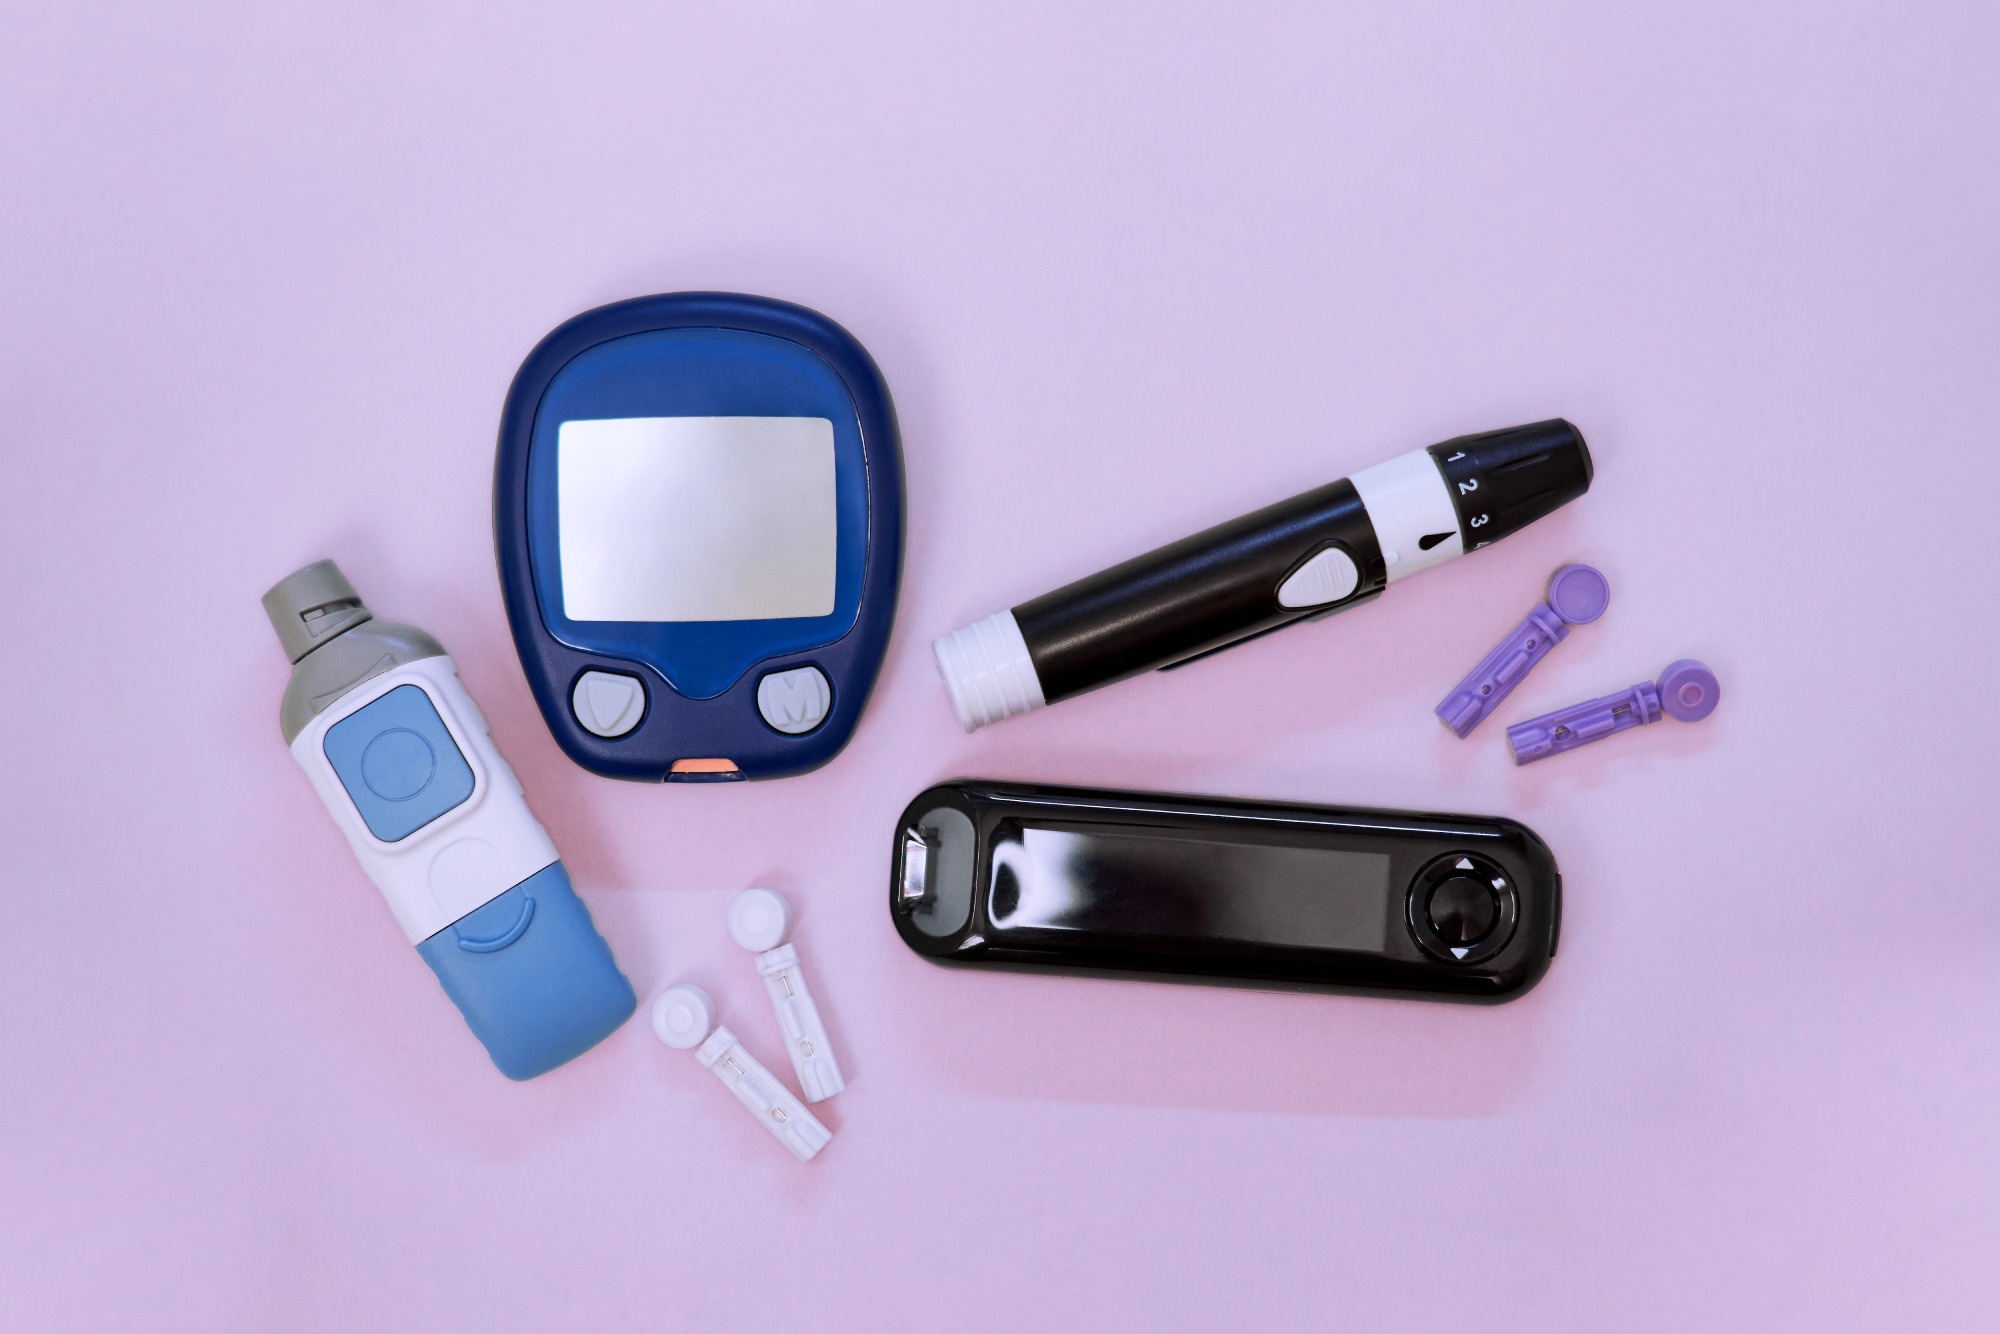 Study: Phenotype-based targeted treatment of SGLT2 inhibitors and GLP-1 receptor agonists in type 2 diabetes. Image Credit: AnastasiyaArtcomma/Shutterstock.com